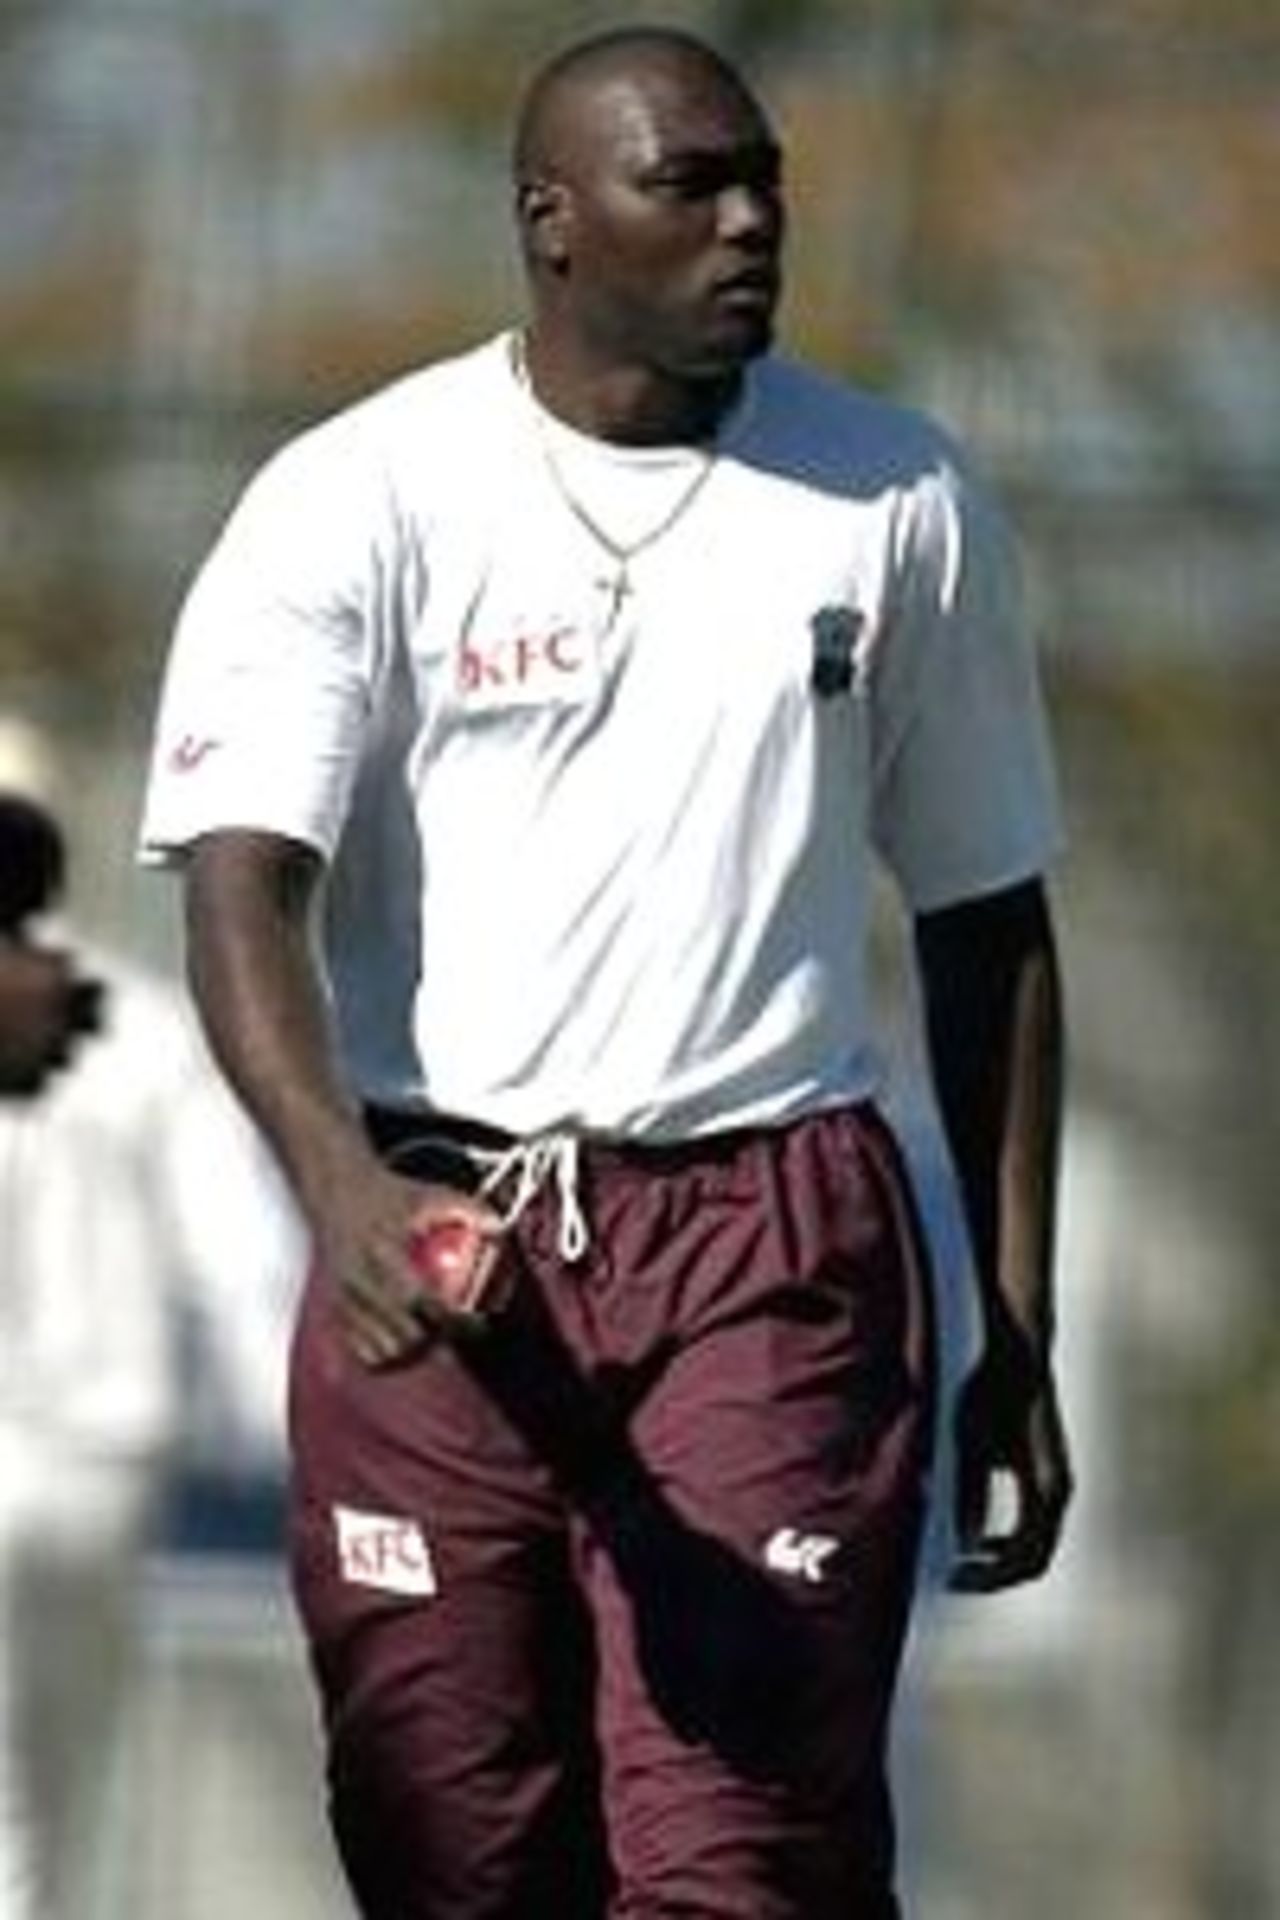 29 Nov 2000: Marlon Black West Indian bowler during the first training session for the West Indies before the second Test match against Australia starting at the WACA Ground in Perth, Western Australia on December 1.